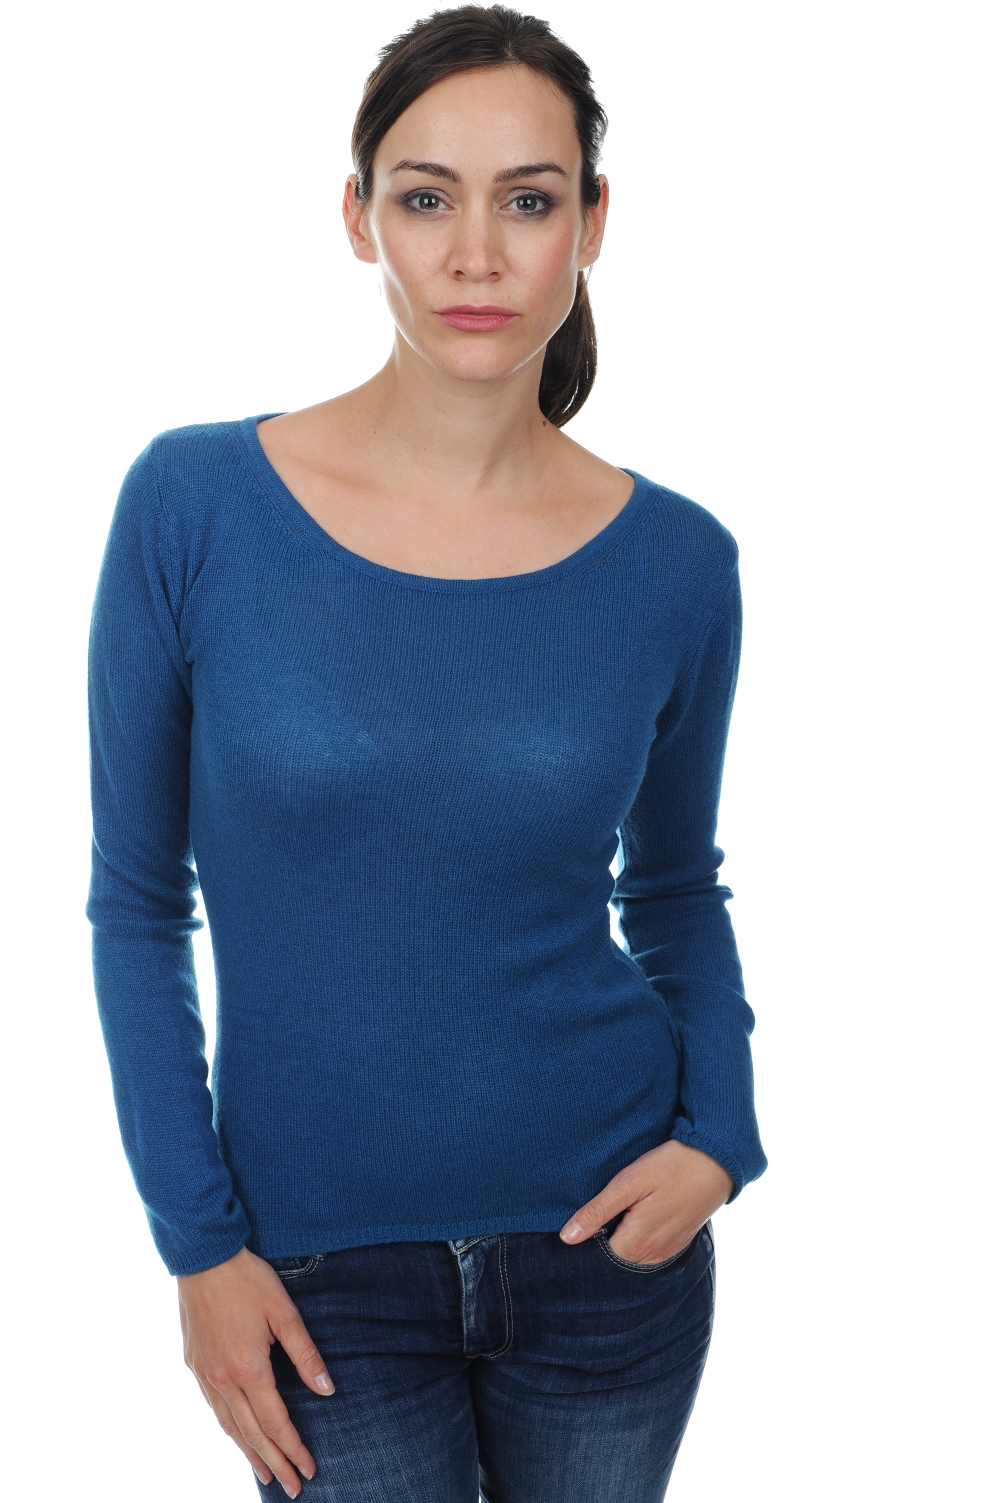 Cashmere ladies basic sweaters at low prices caleen canard blue xs